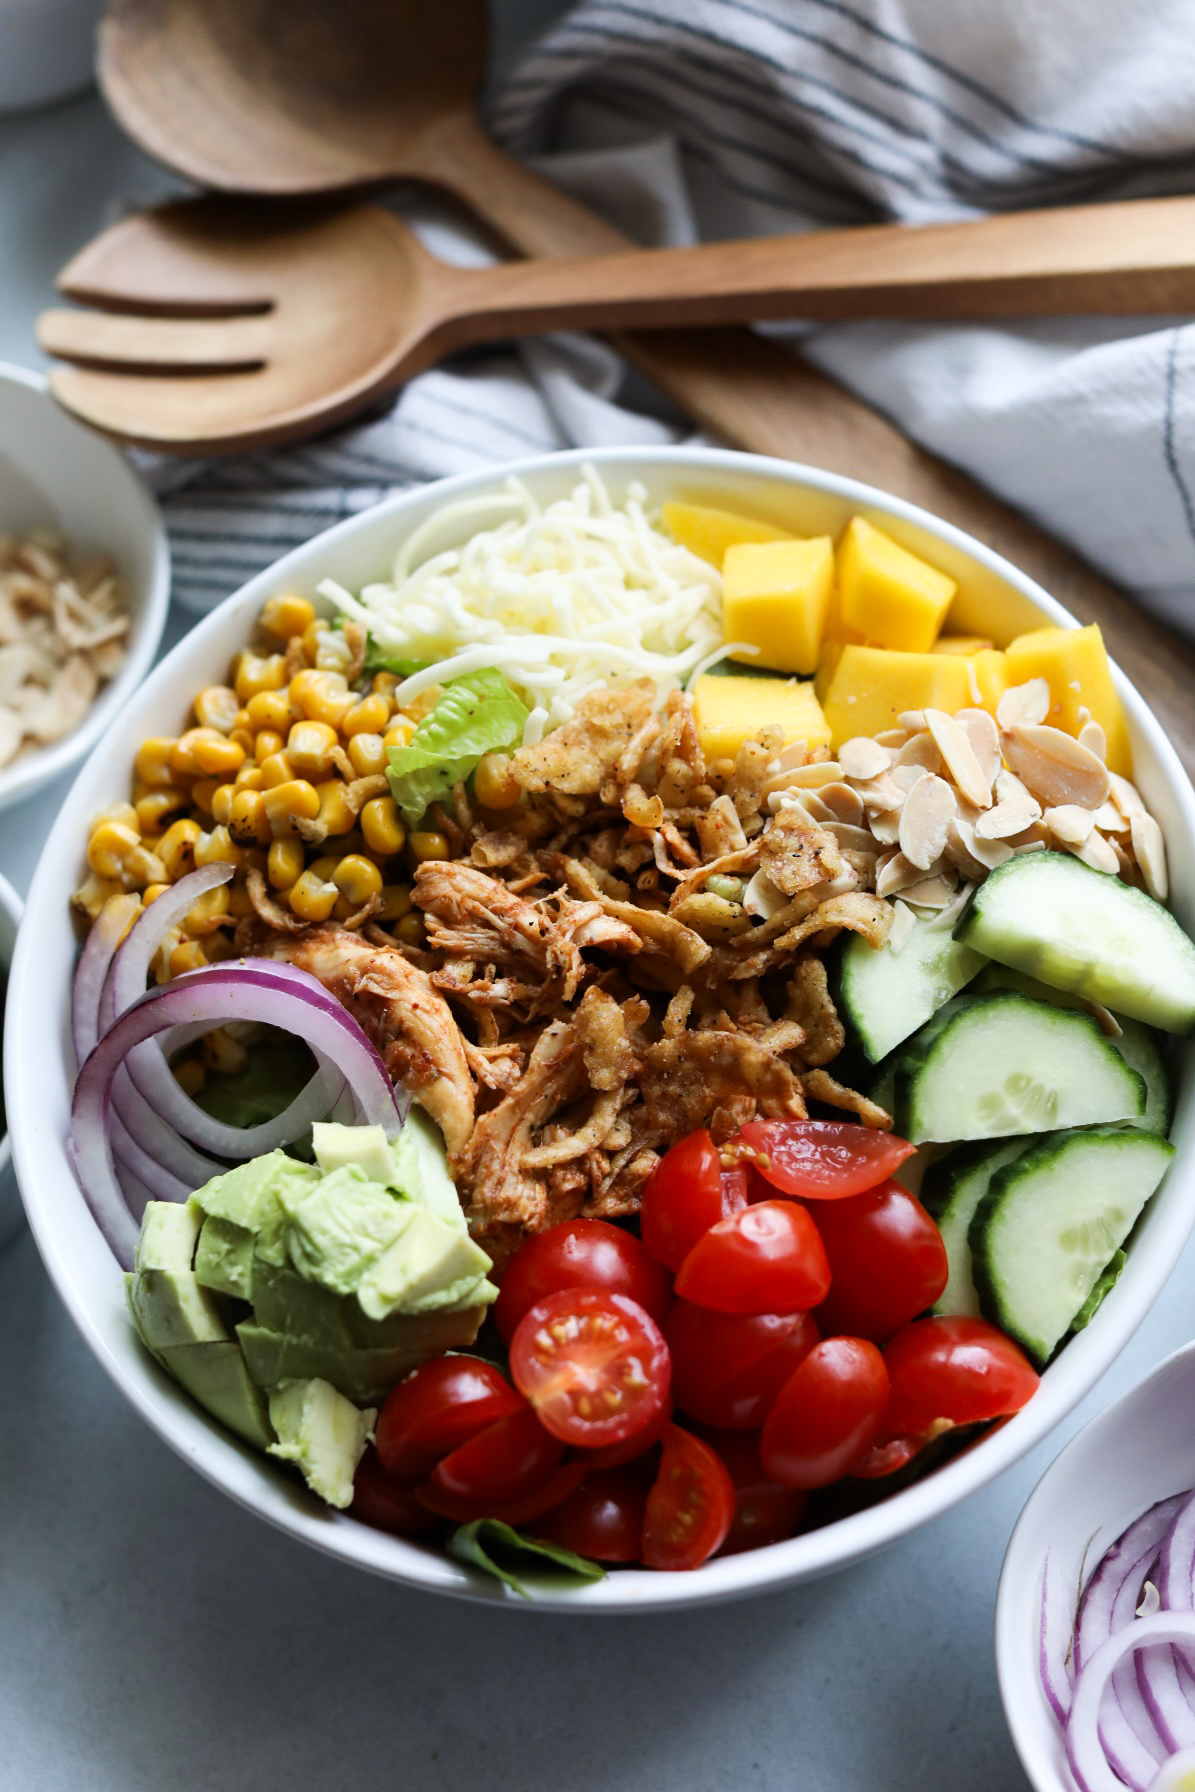 Top view of BBQ Chicken Salad recipe with all ingredients layered like a burrito bowl without dressing.